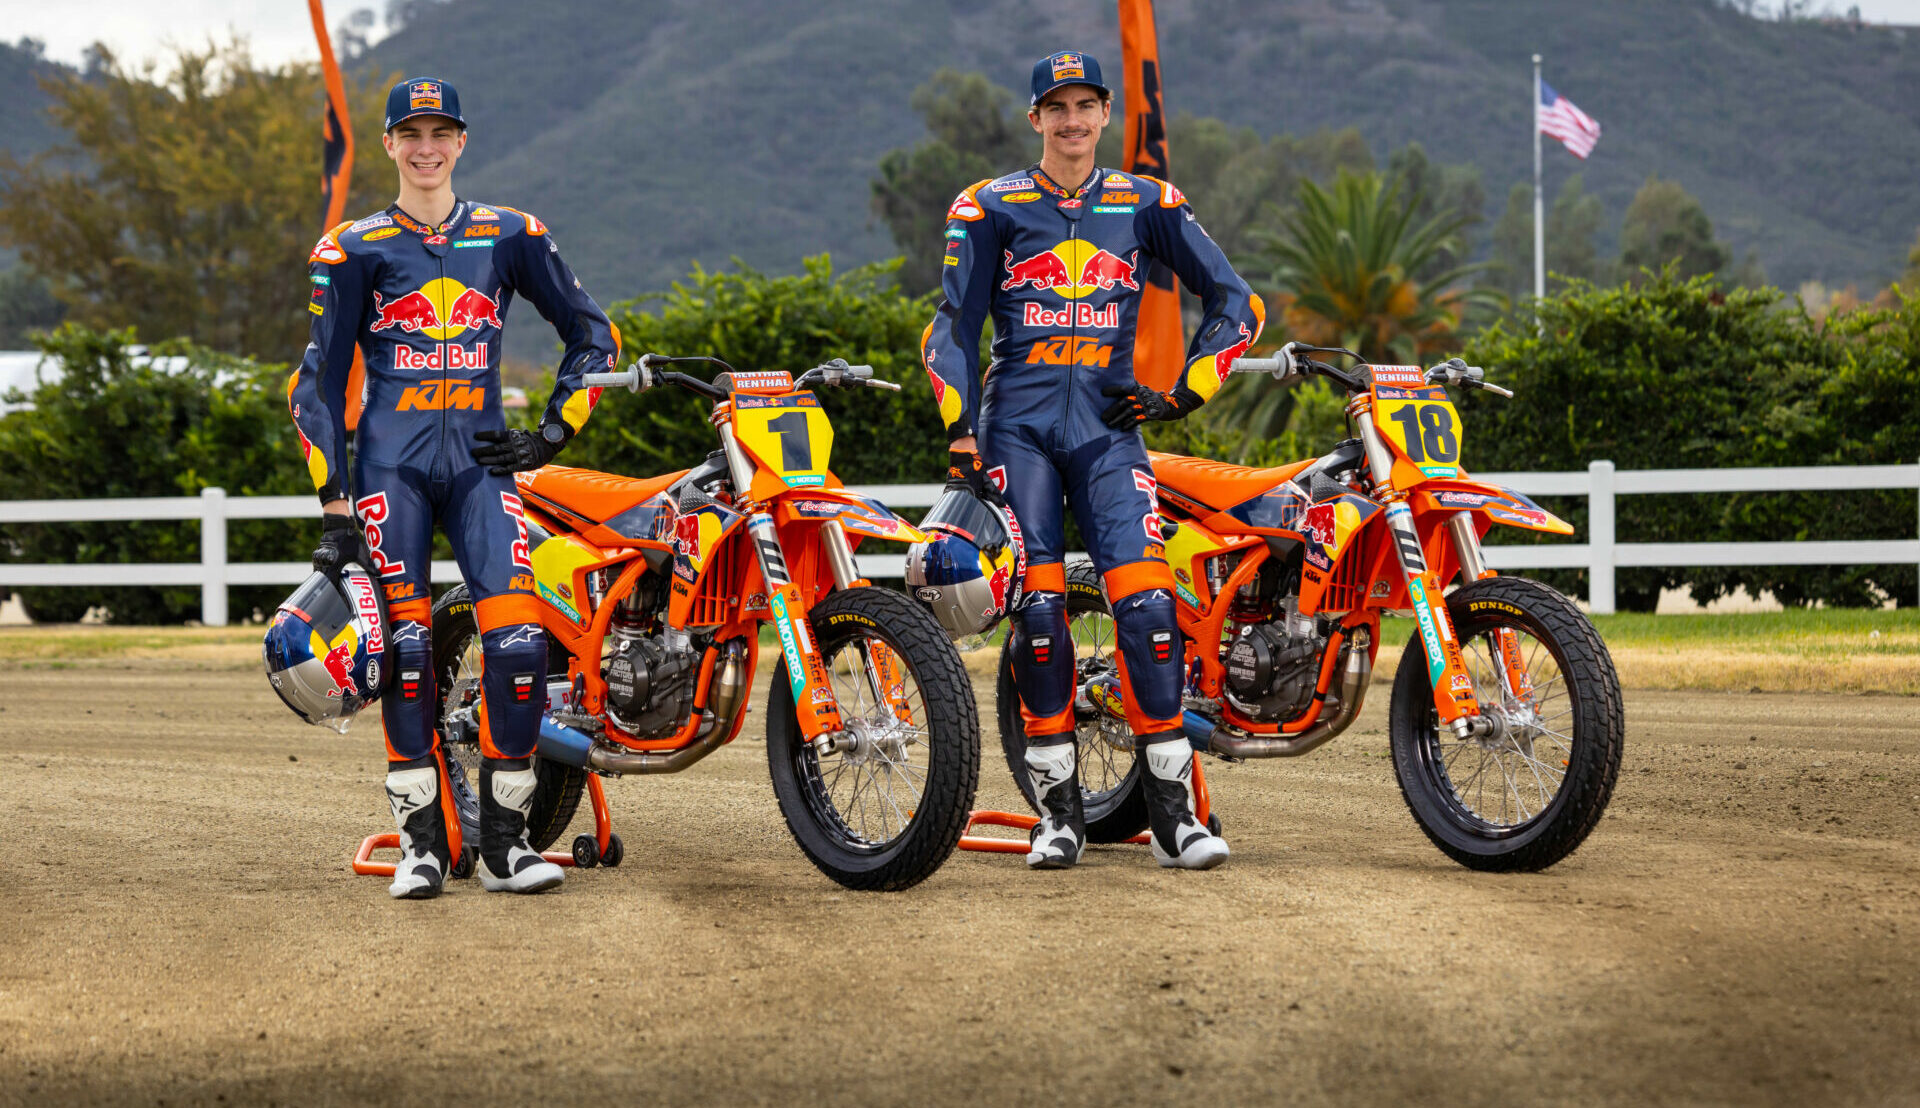 Red Bull KTM riders Kody Kopp (left) and Max Whale (right). Photo courtesy KTM Factory Racing.